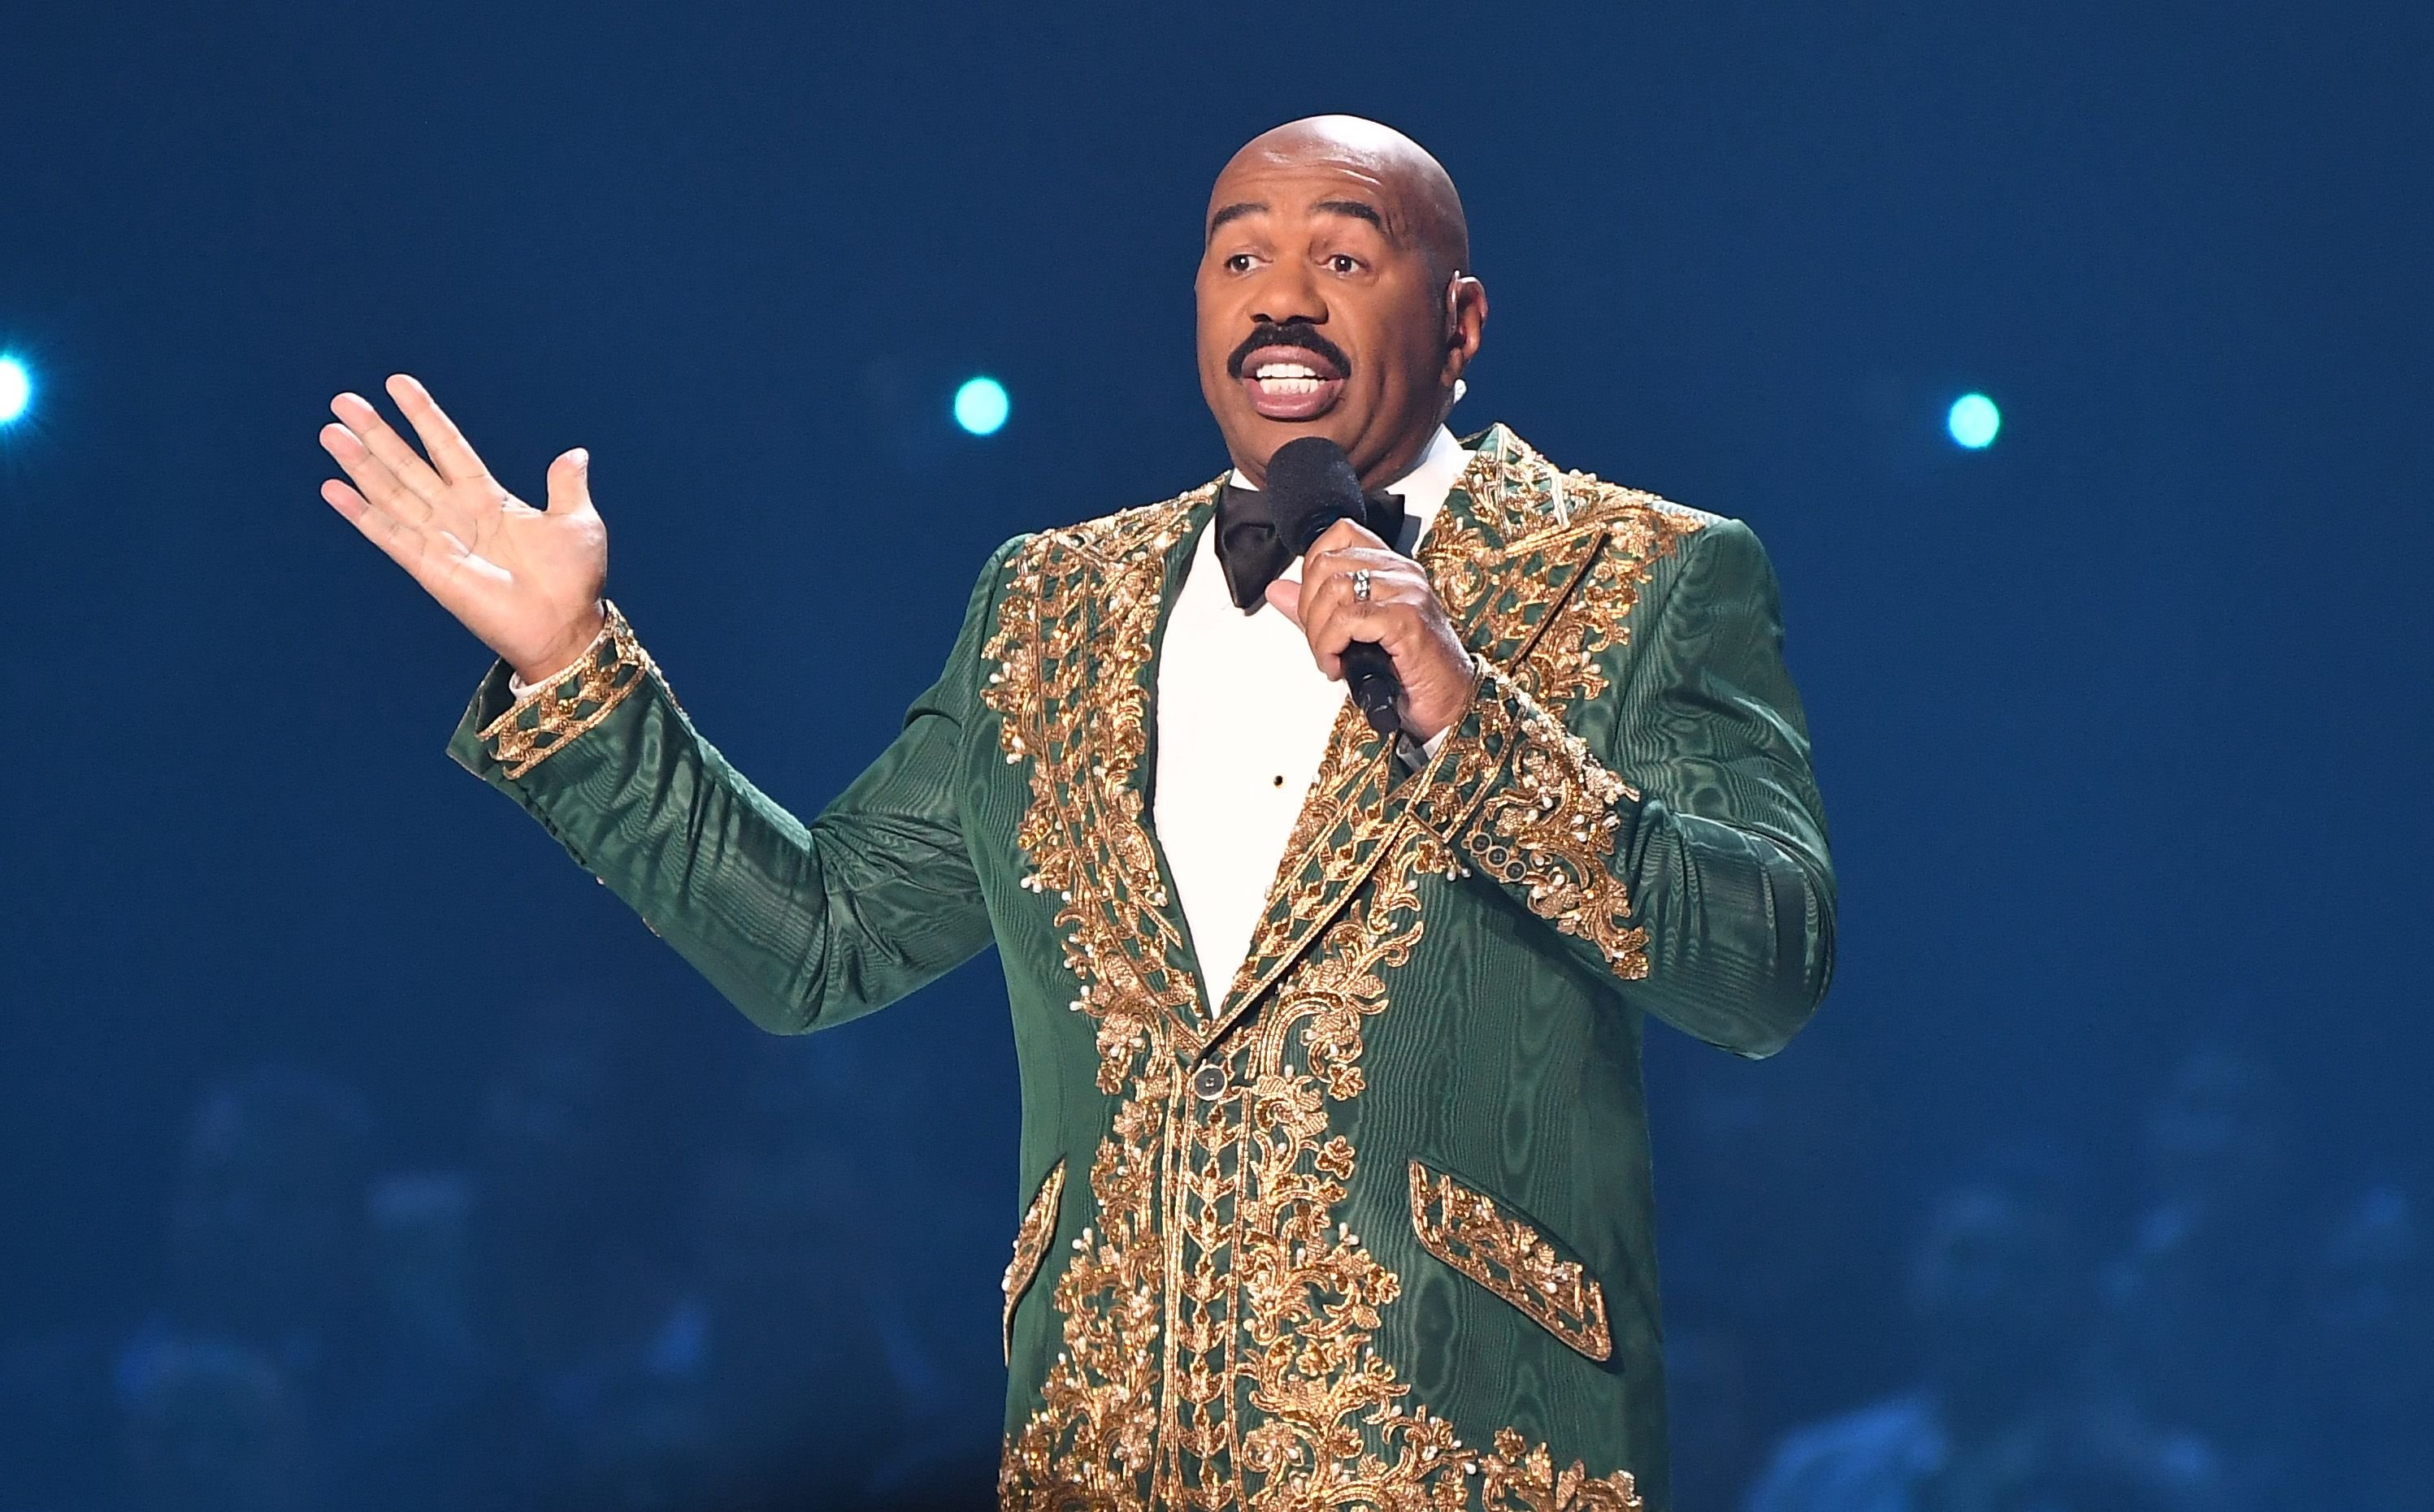  Steve Harvey speaks during the Miss Universe Pageant at Tyler Perry Studios on December 08, 2019 | Photo: Getty Images